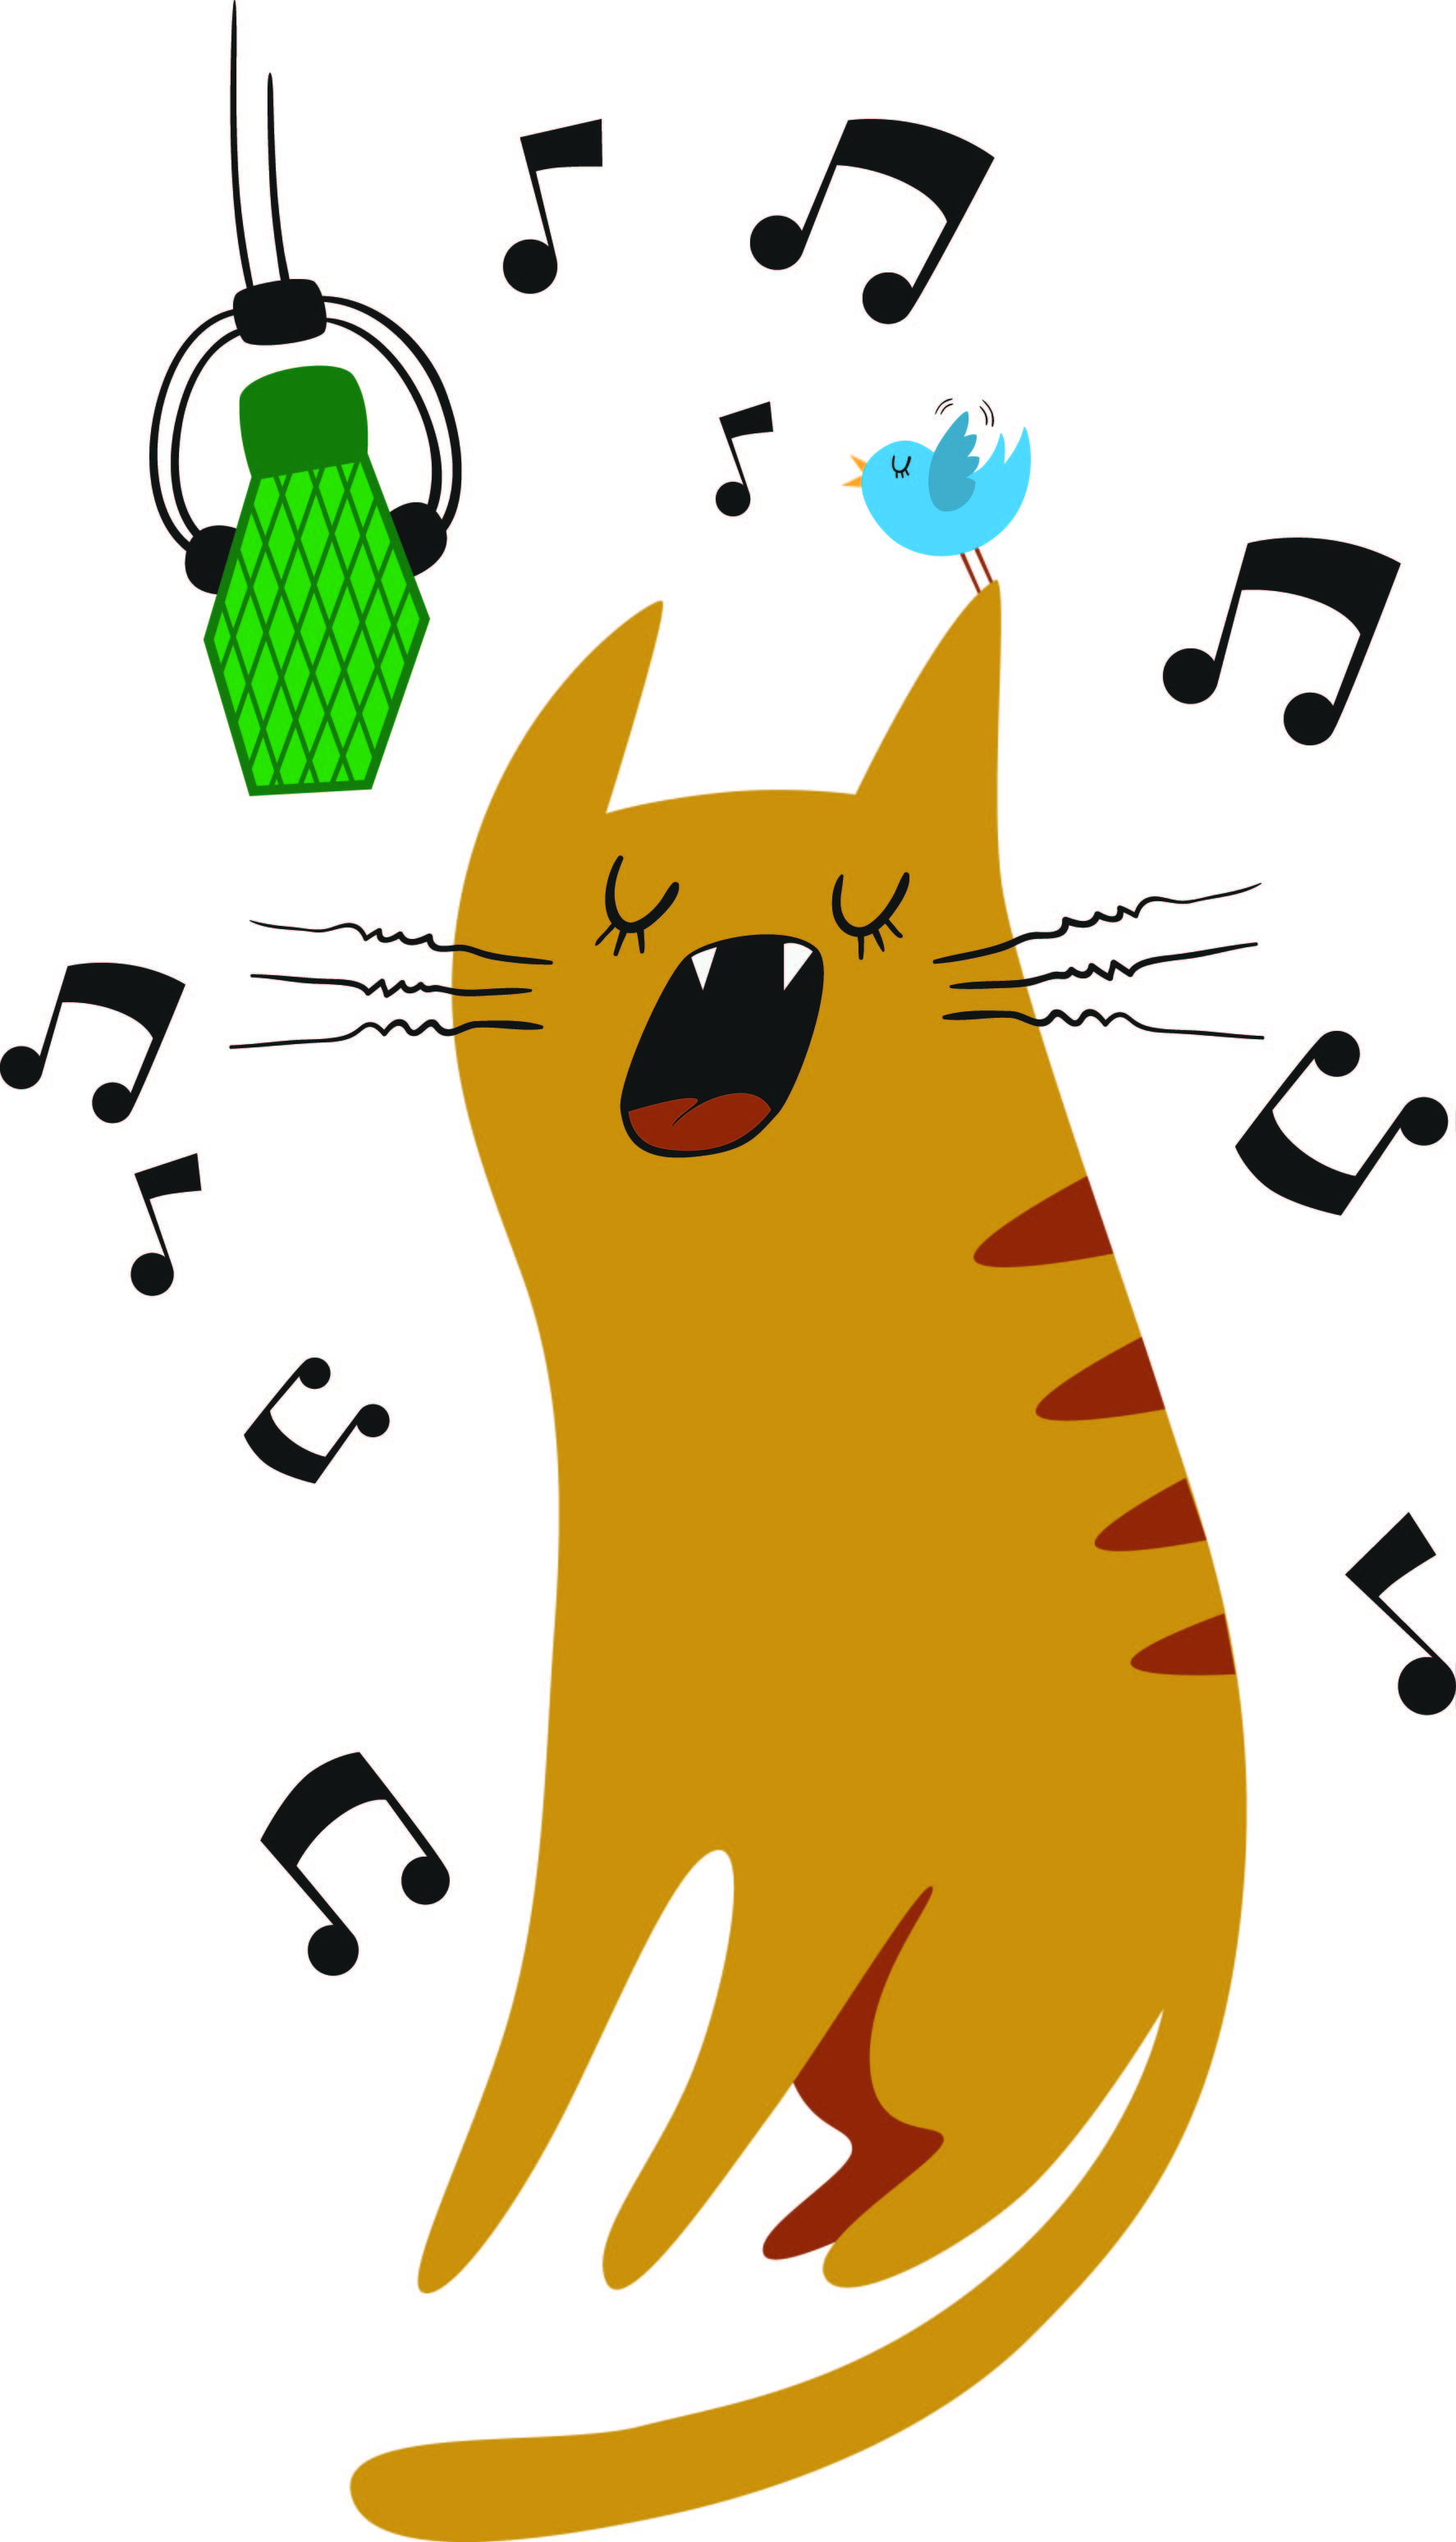 Cartoon image of cat and birding singing into mic, surrounded by music notes